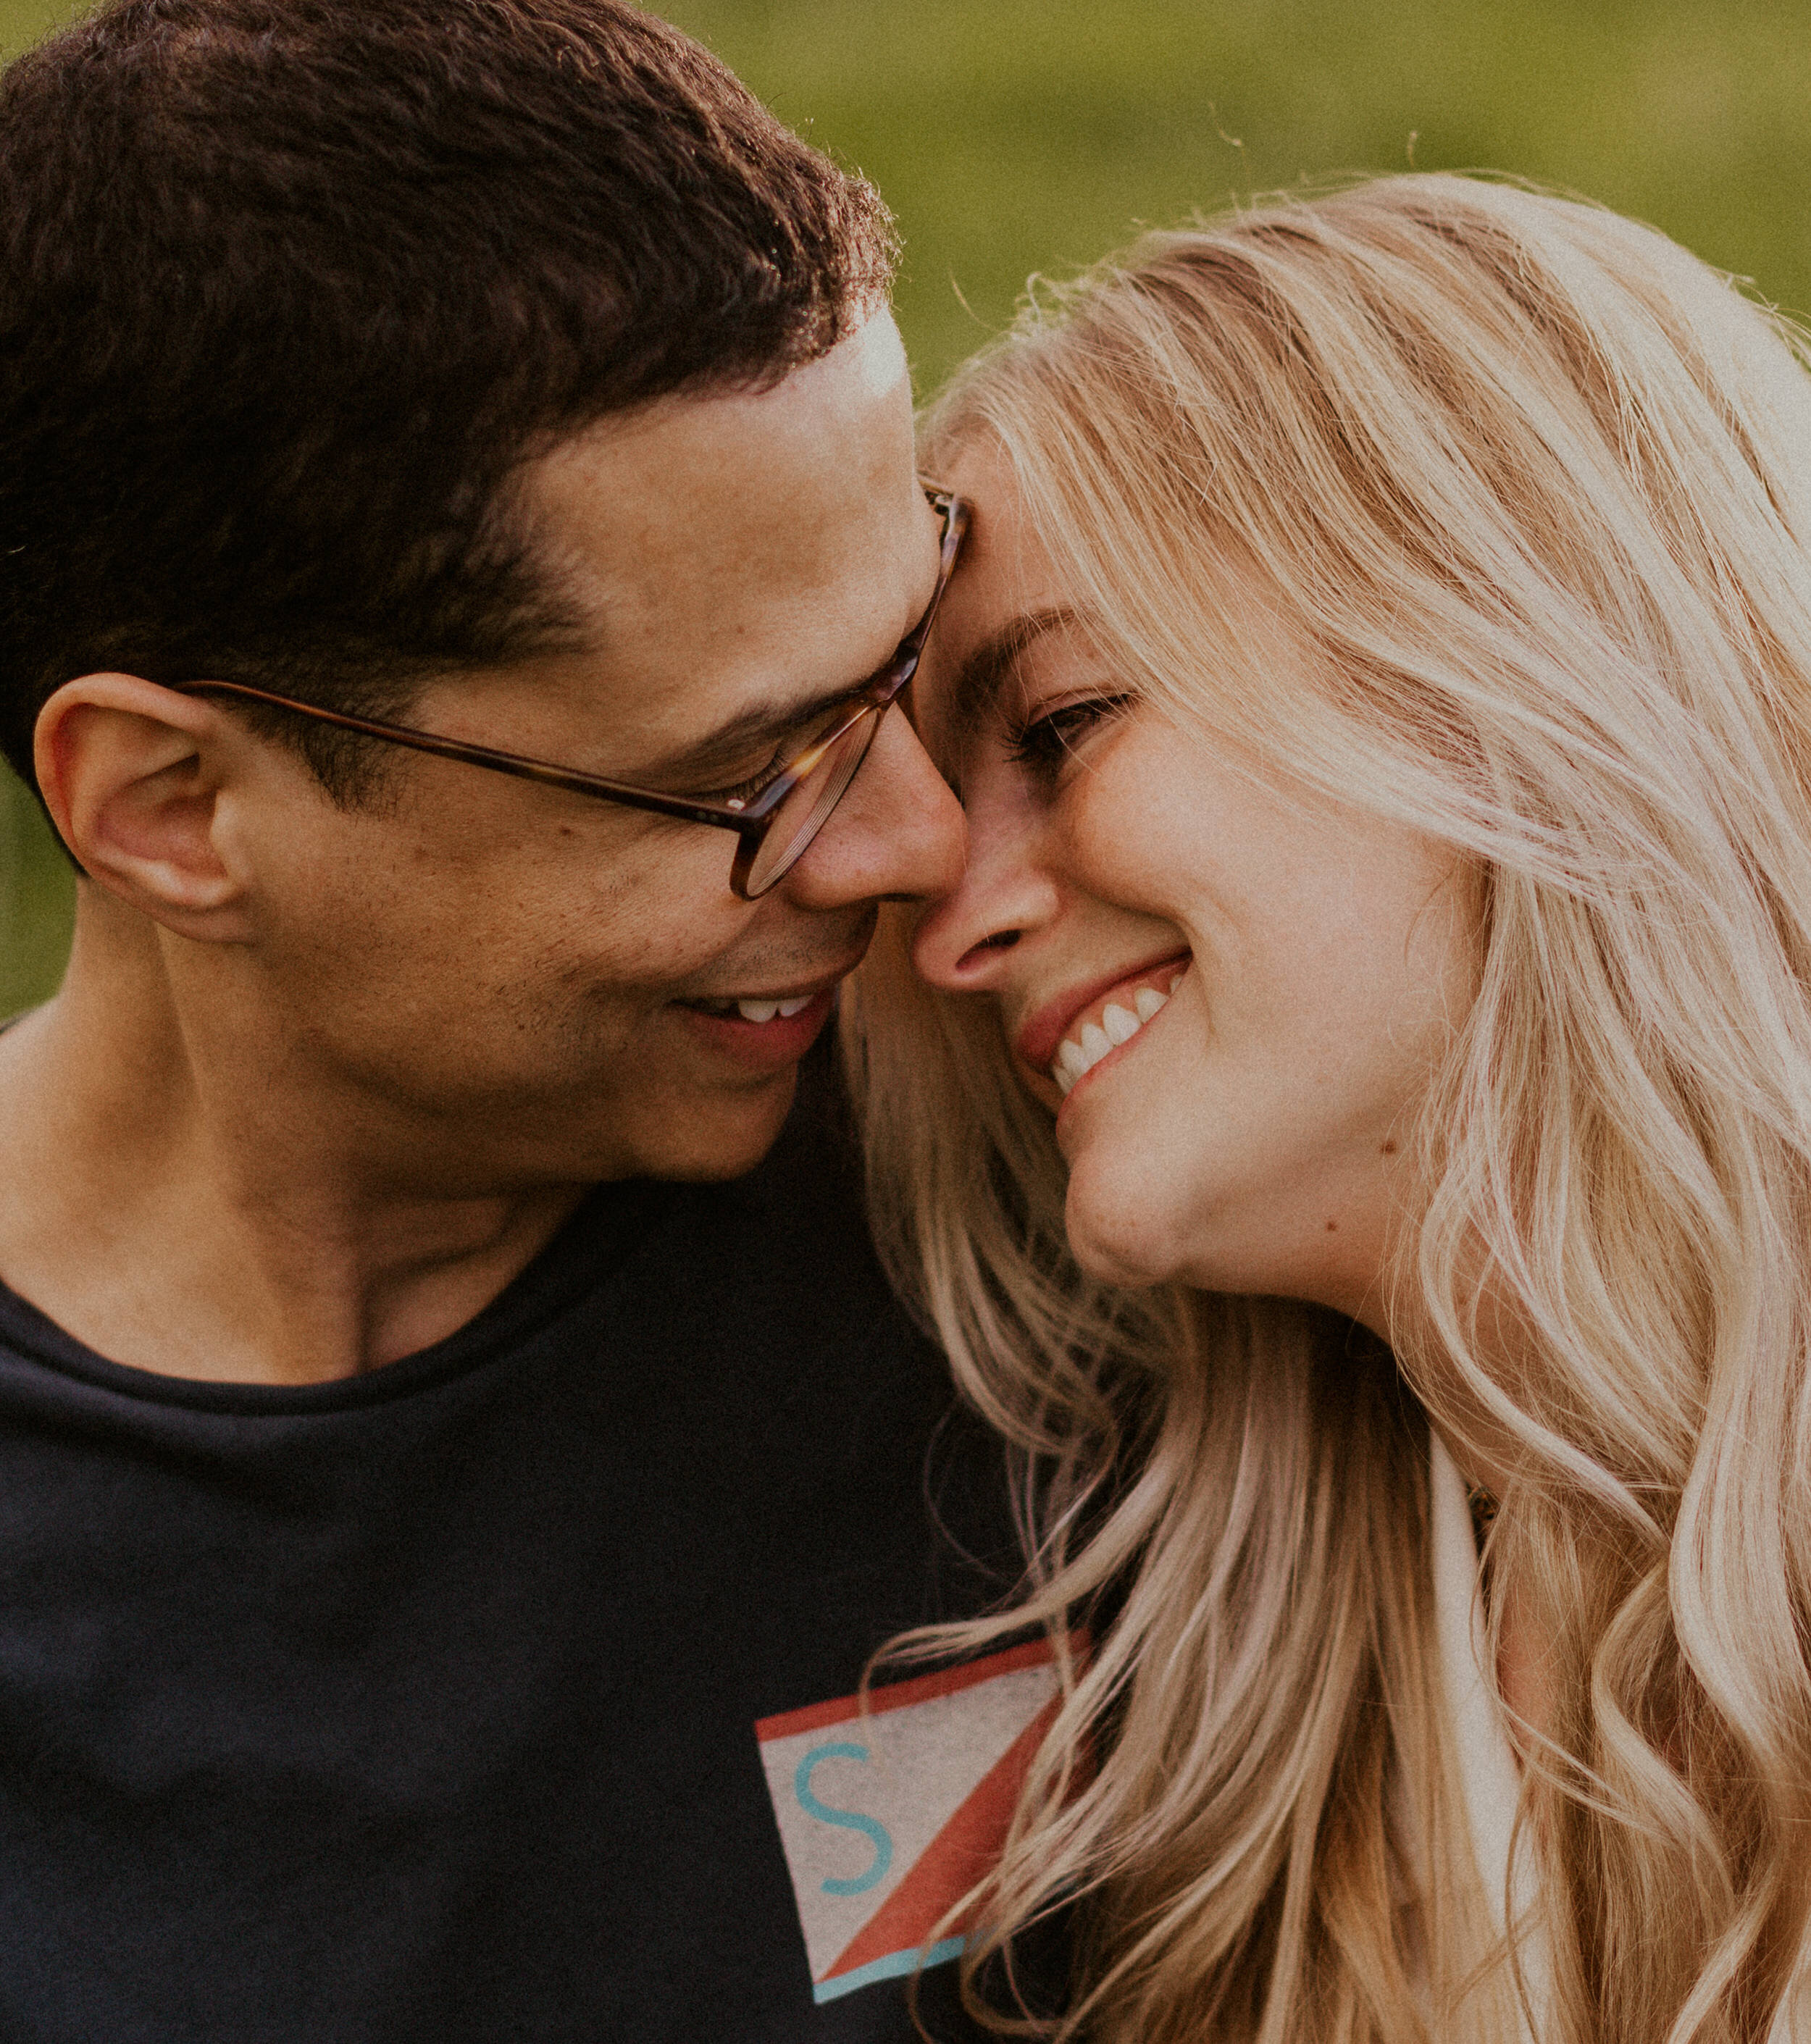 snoqualmie-pass-engagement-session20.jpg